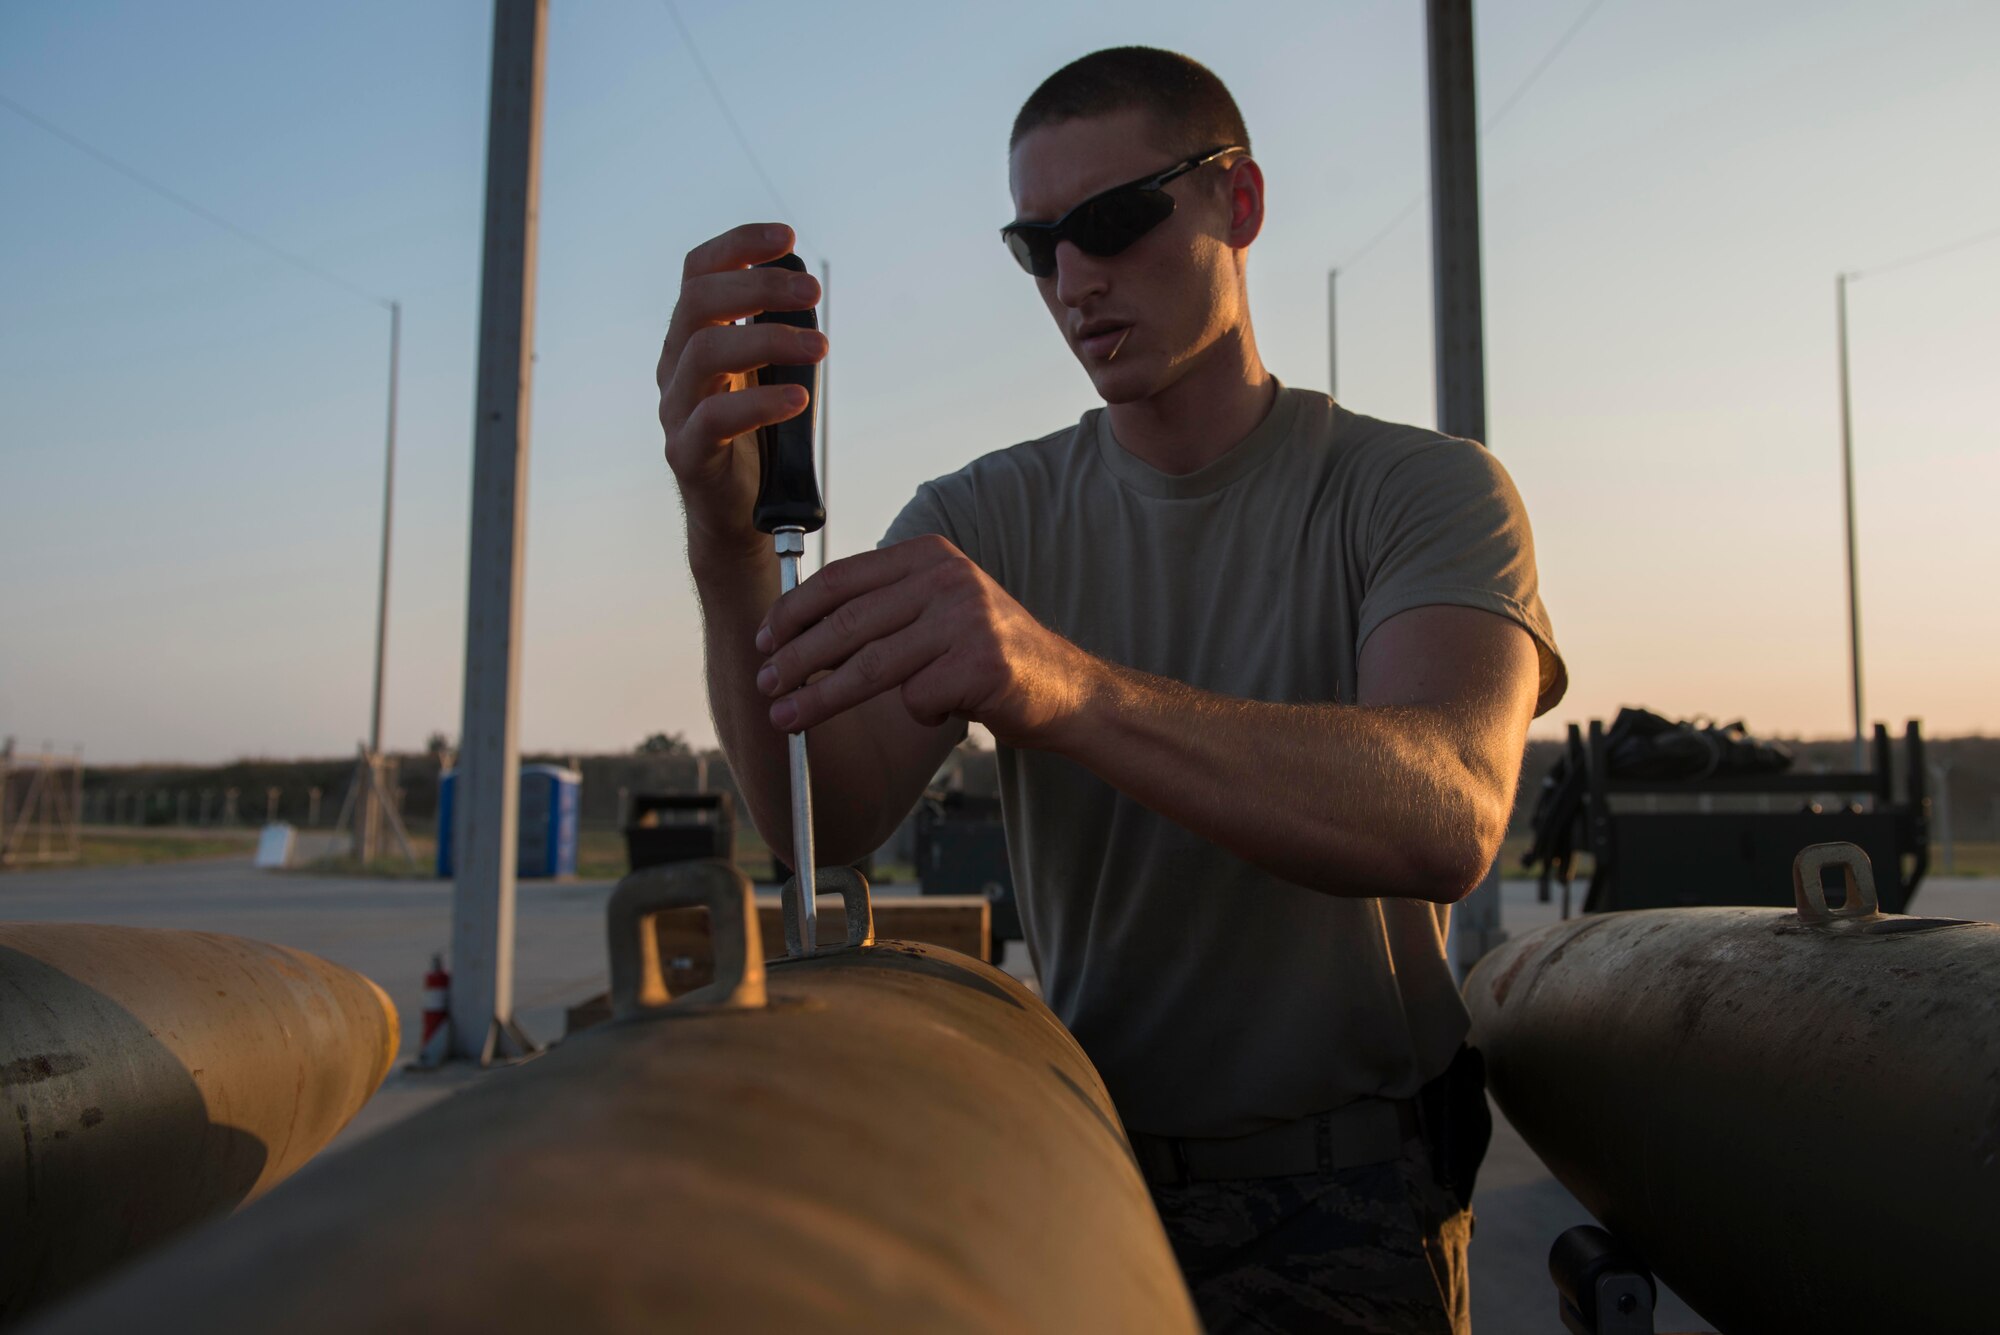 U.S. Air Force Staff Sgt. Shadrach Mchargue, 447th Expeditionary Aircraft Maintenance Squadron munitions systems specialist, builds a GBU-12 Paveway II laser-guided bomb Aug. 8, 2016, at Incirlik Air Base, Turkey. Once completed, munitions will be delivered to aircraft for installation or to a storage area. (U.S. Air Force photo by Senior Airman John Nieves Camacho)